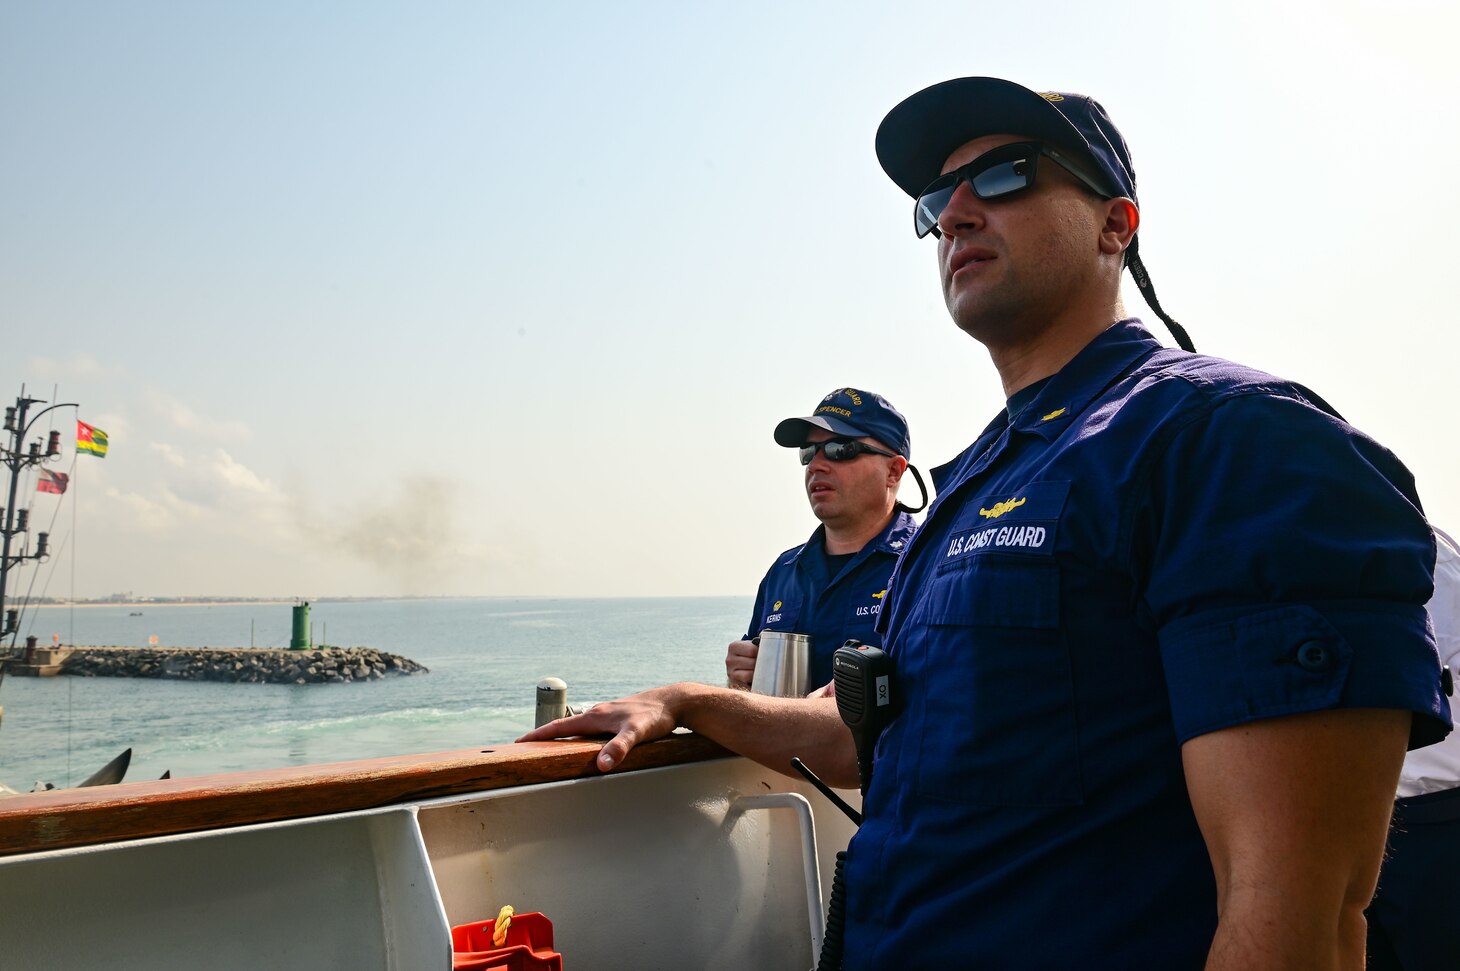 Cmdr. Corey Kerns, commanding officer, and Lt. Cmdr. Nicholas Forni, executive officer of USCGC Spencer (WMEC 905), supervise from the bridge as the cutter moors in Lomé, Togo Jan. 25, 2023.